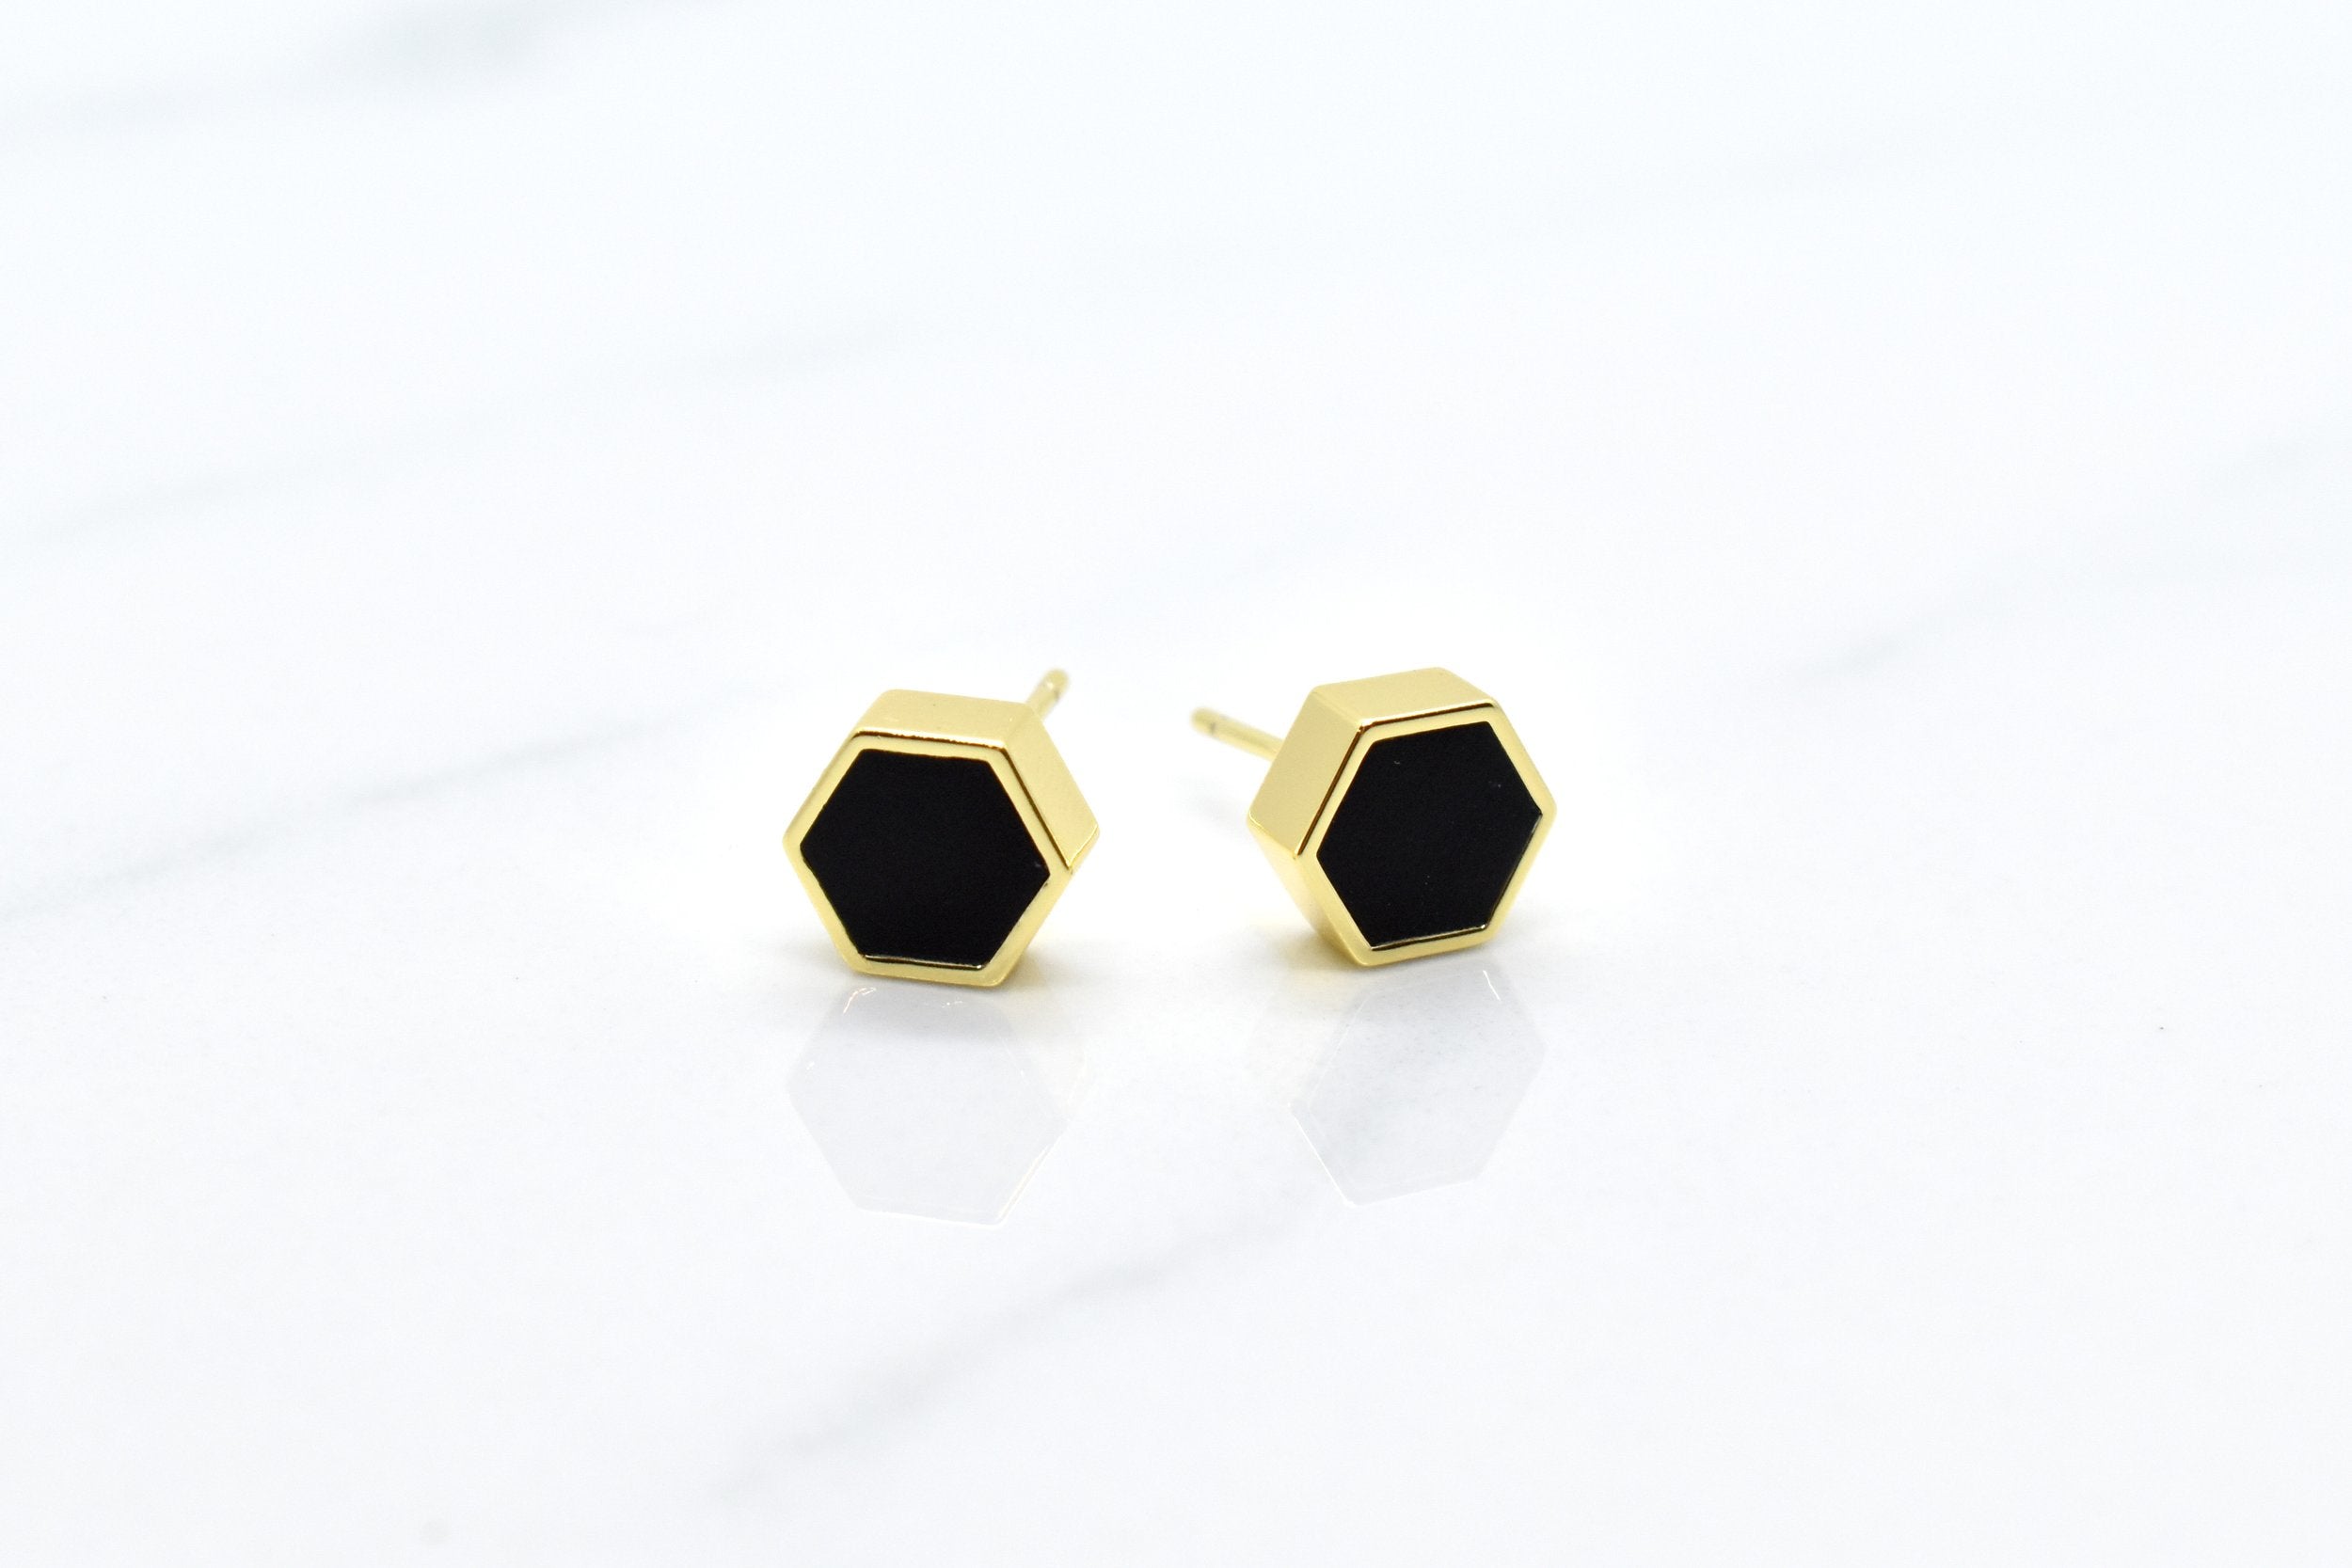 hexagon stud earring set black clay and 14k gold plated sterling silver hypoallergenic and good for sensitive ears